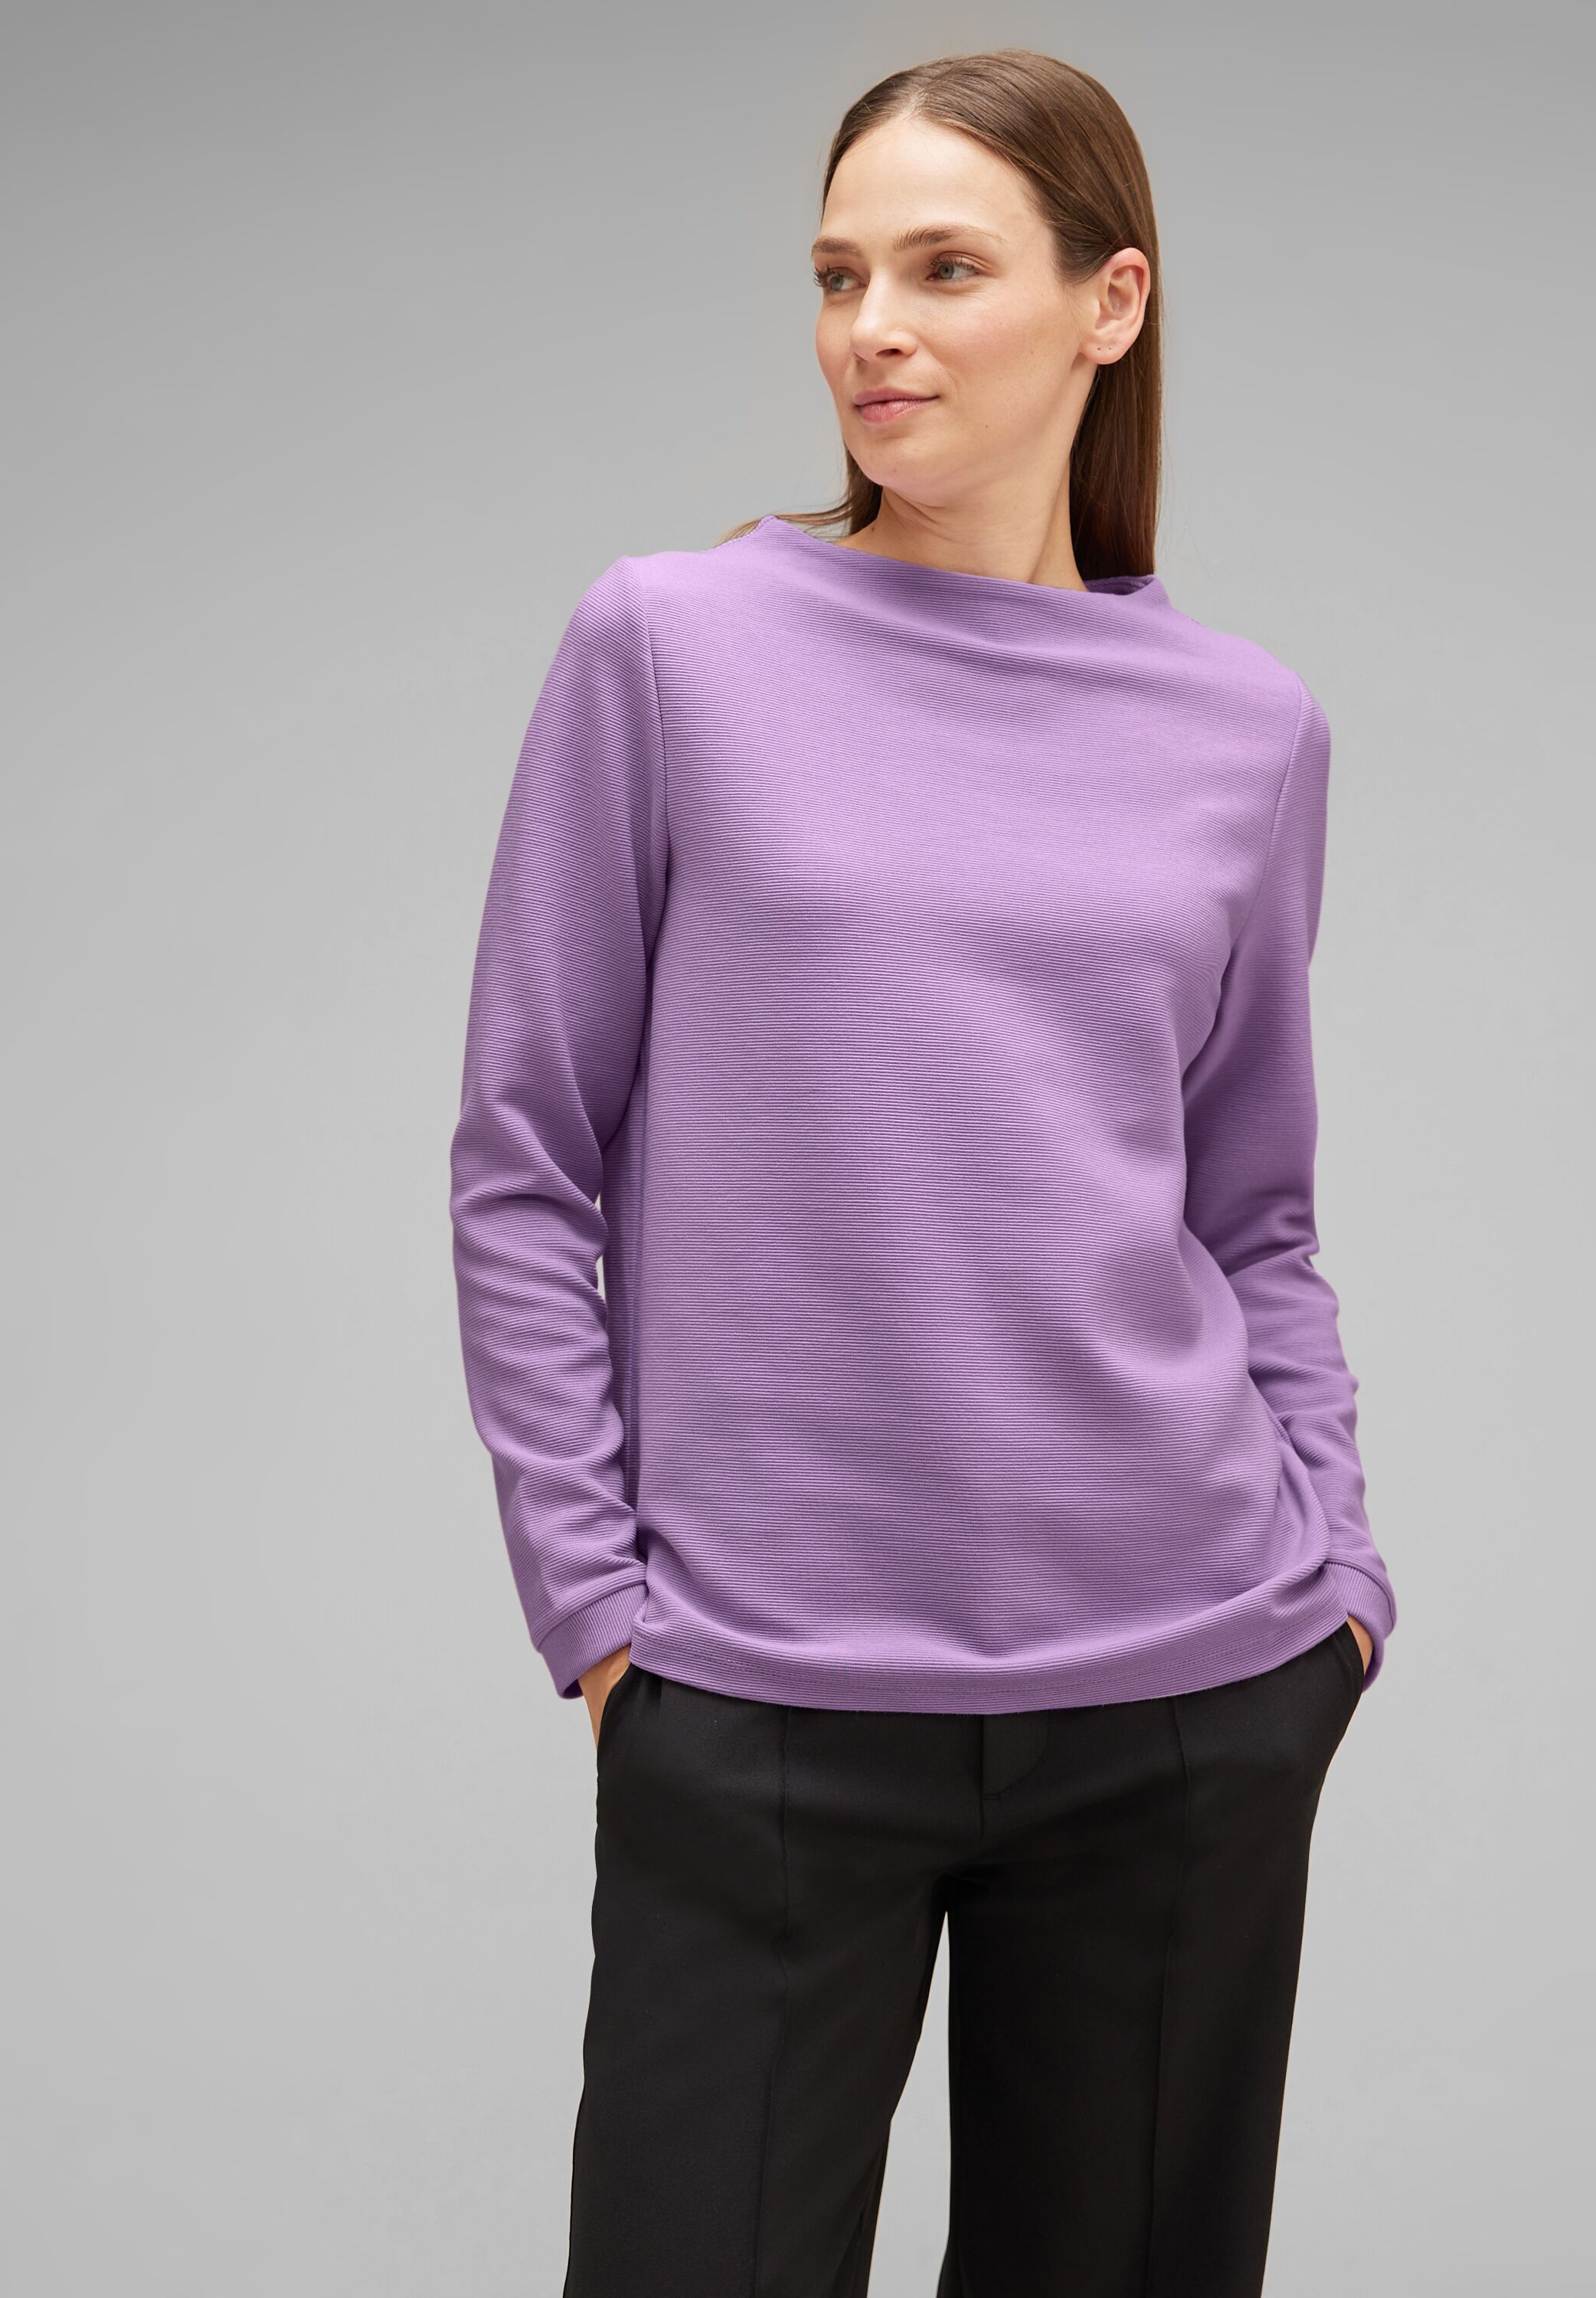 Street One Langarmshirt Lilac Soft reduziert SALE im Pure - in A320576-15289 Mode CONCEPT